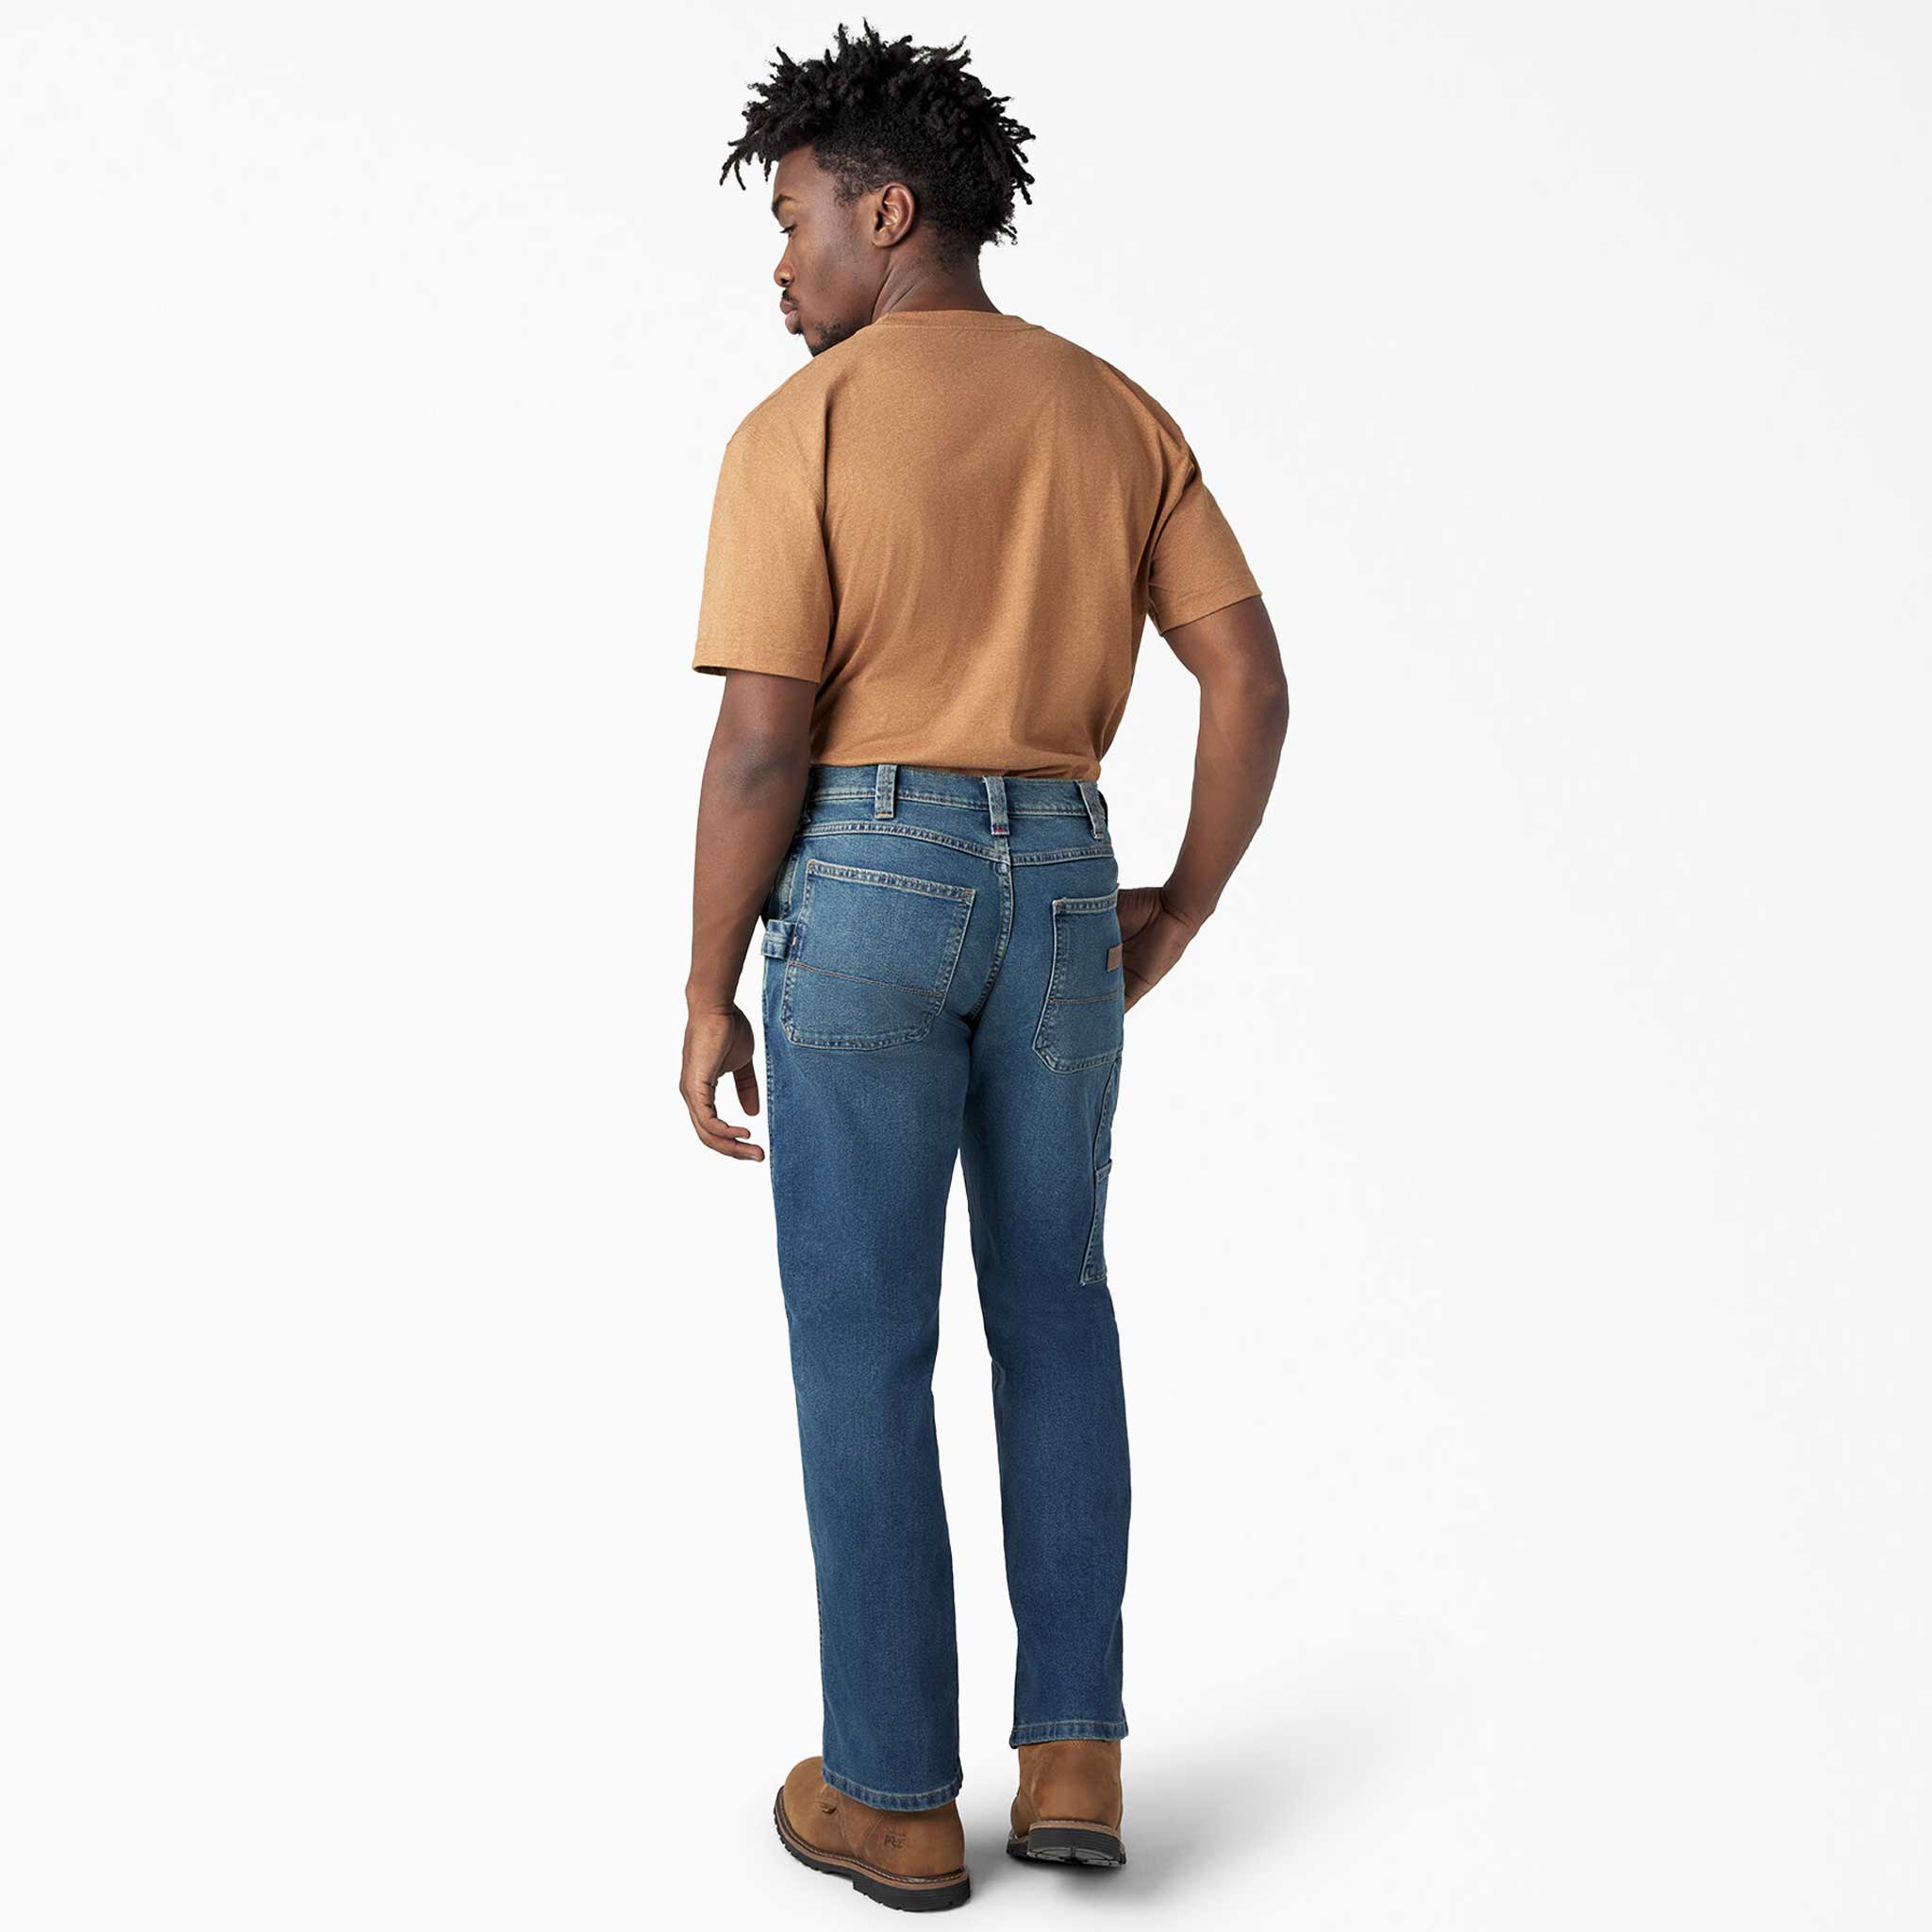 FLEX Relaxed Fit Carpenter Jeans